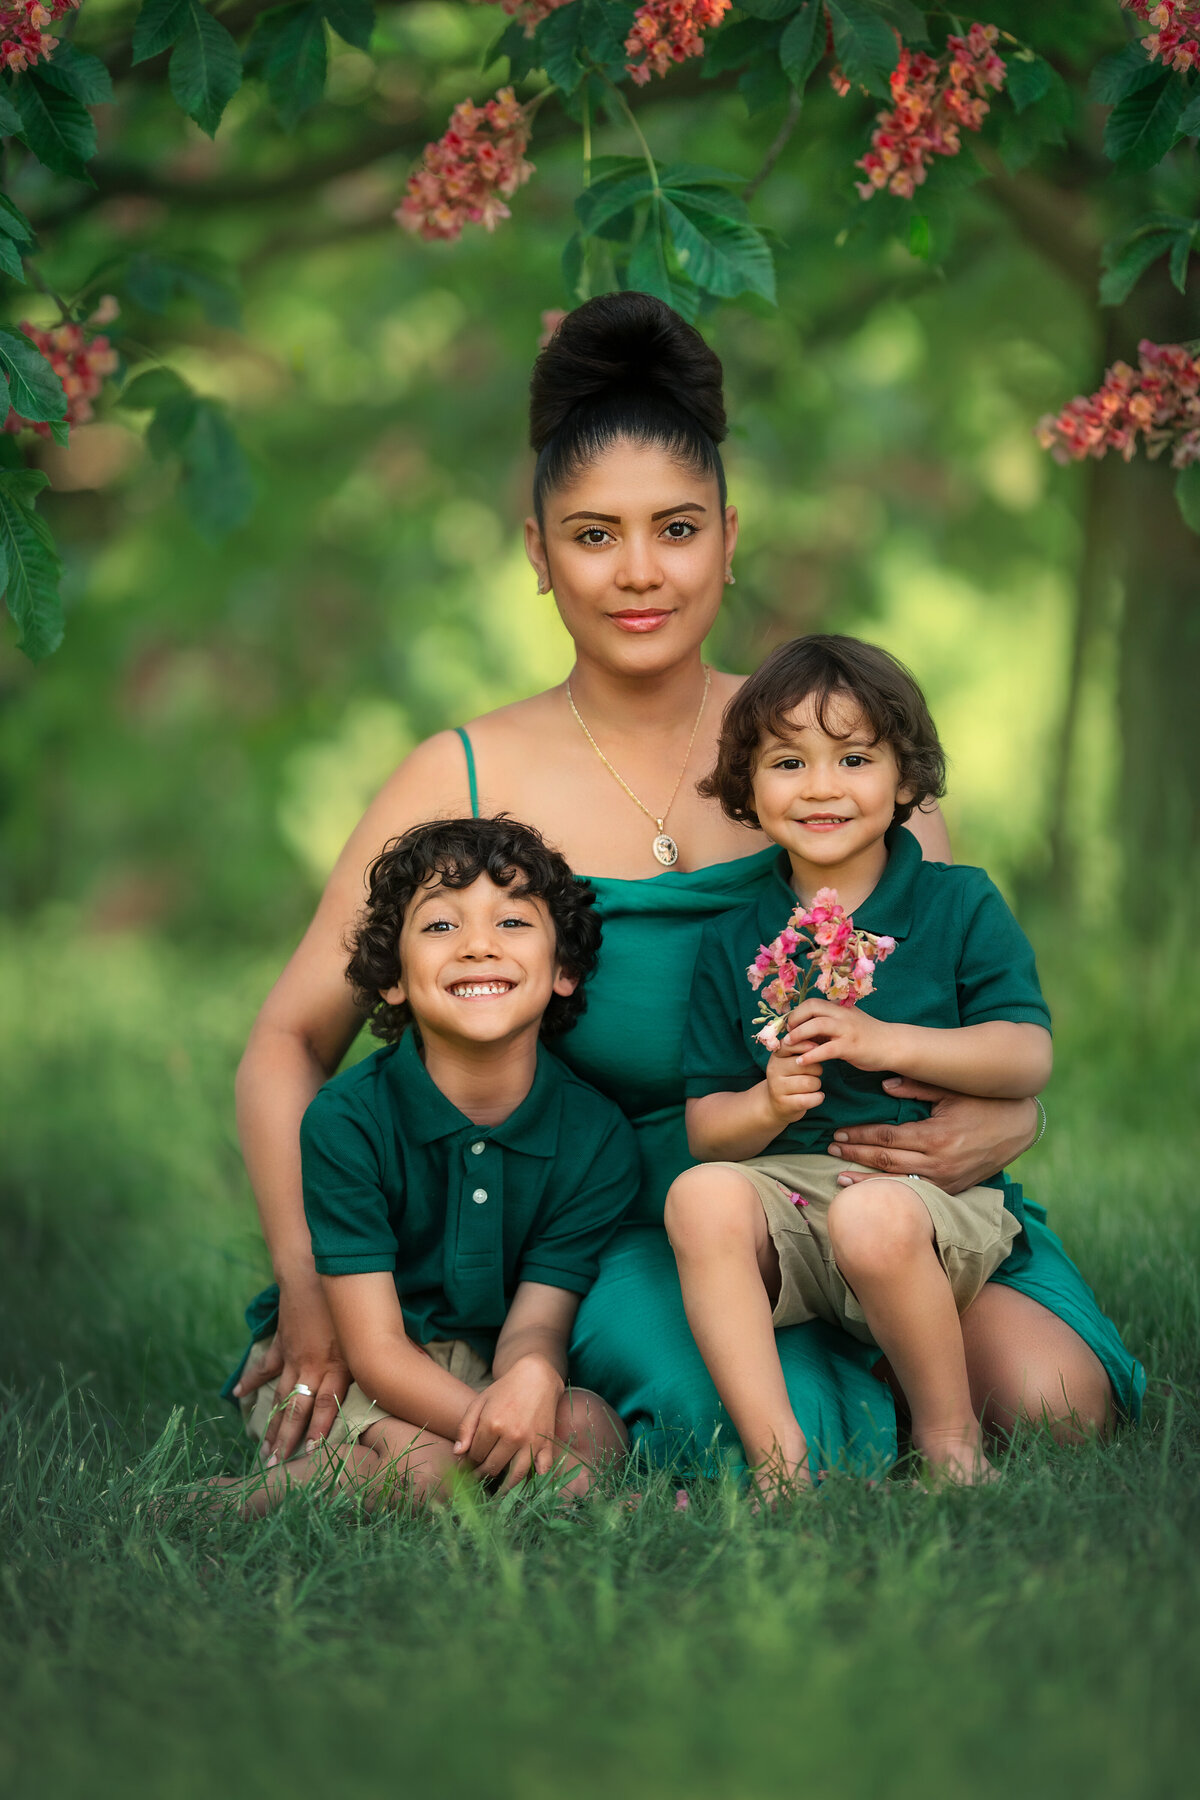 Hispanic mom and her two kids dressed in green  clothes  holding chestnut tree blossoms